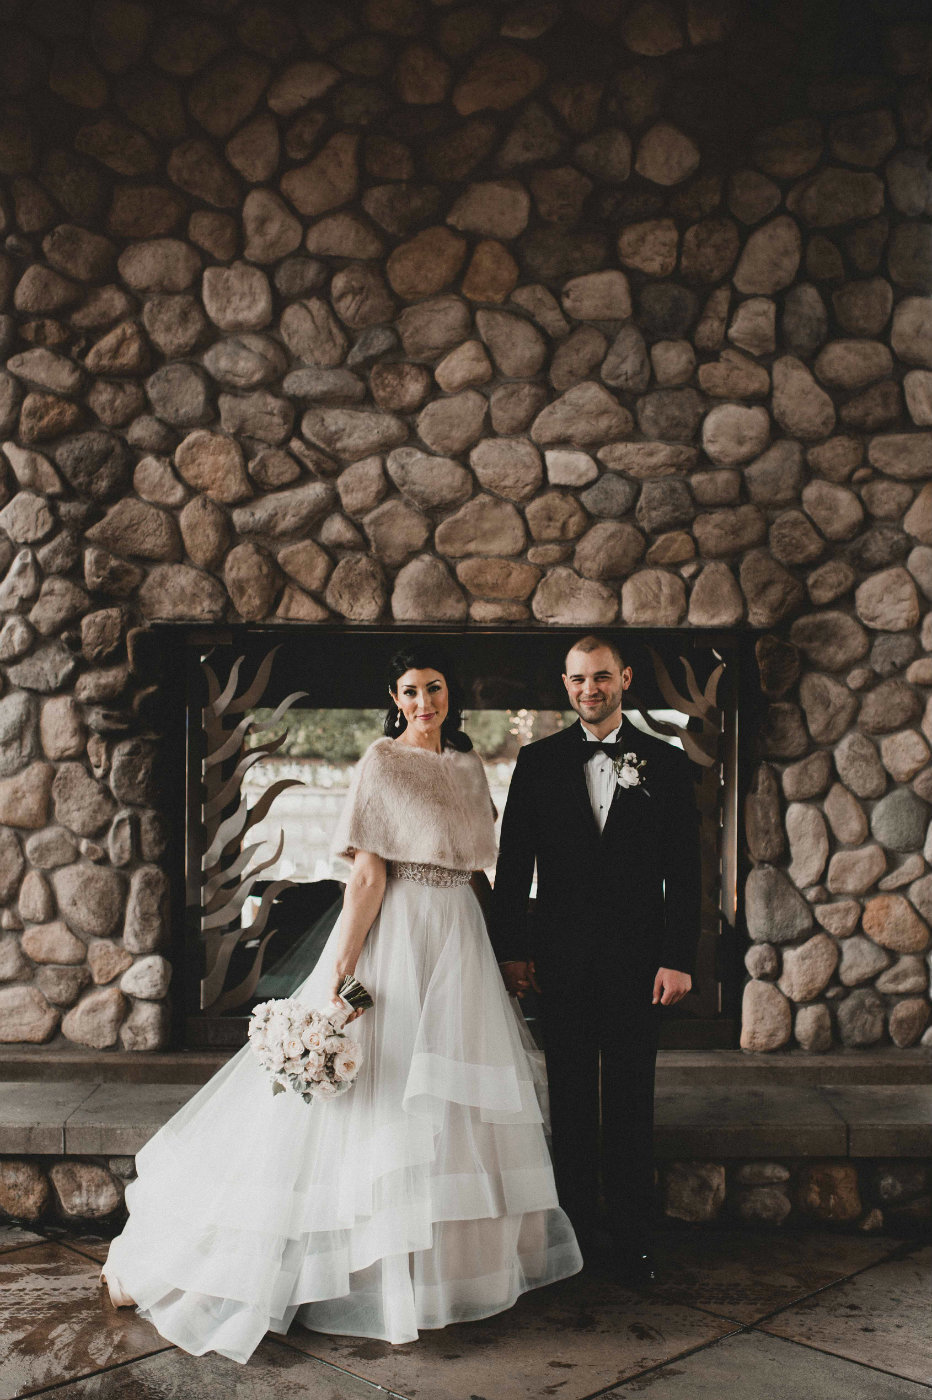 bride and groom at their winter wedding at Edgewater Hotel Seattle in front of large stone walled fireplace